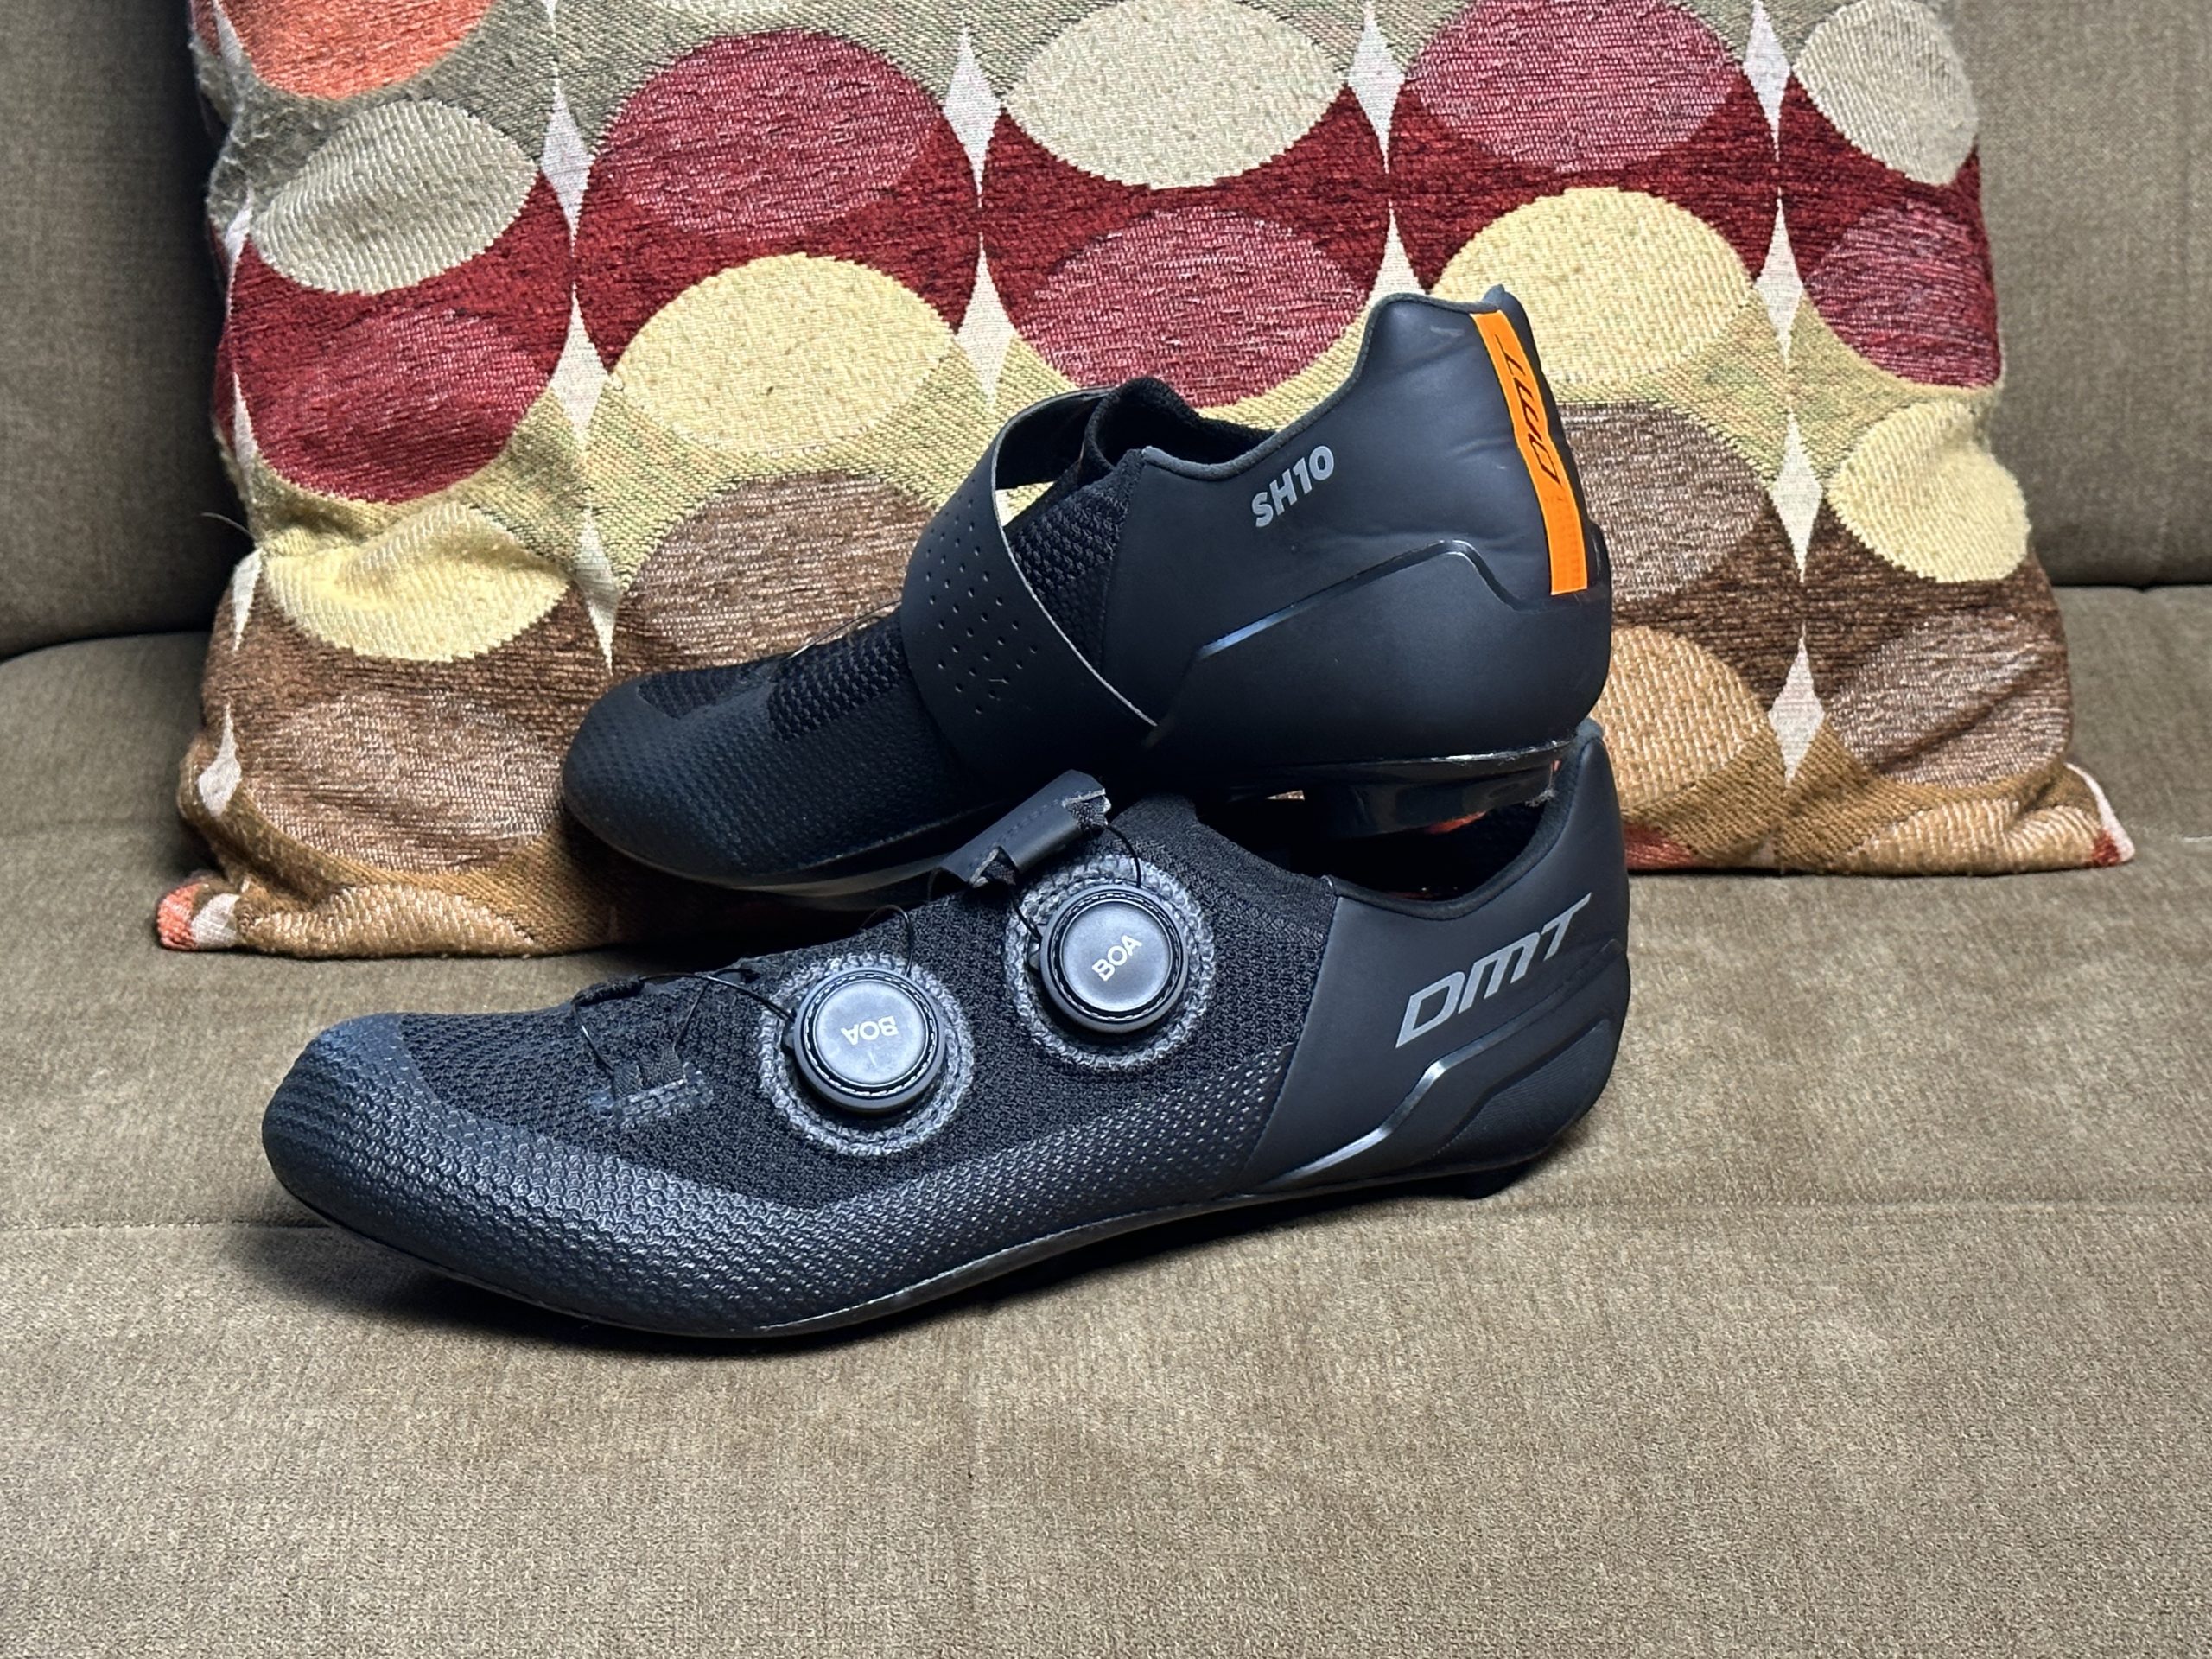 DMT SH10 ROAD SHOES - WARM WEATHER KNIT, NARROW FIT